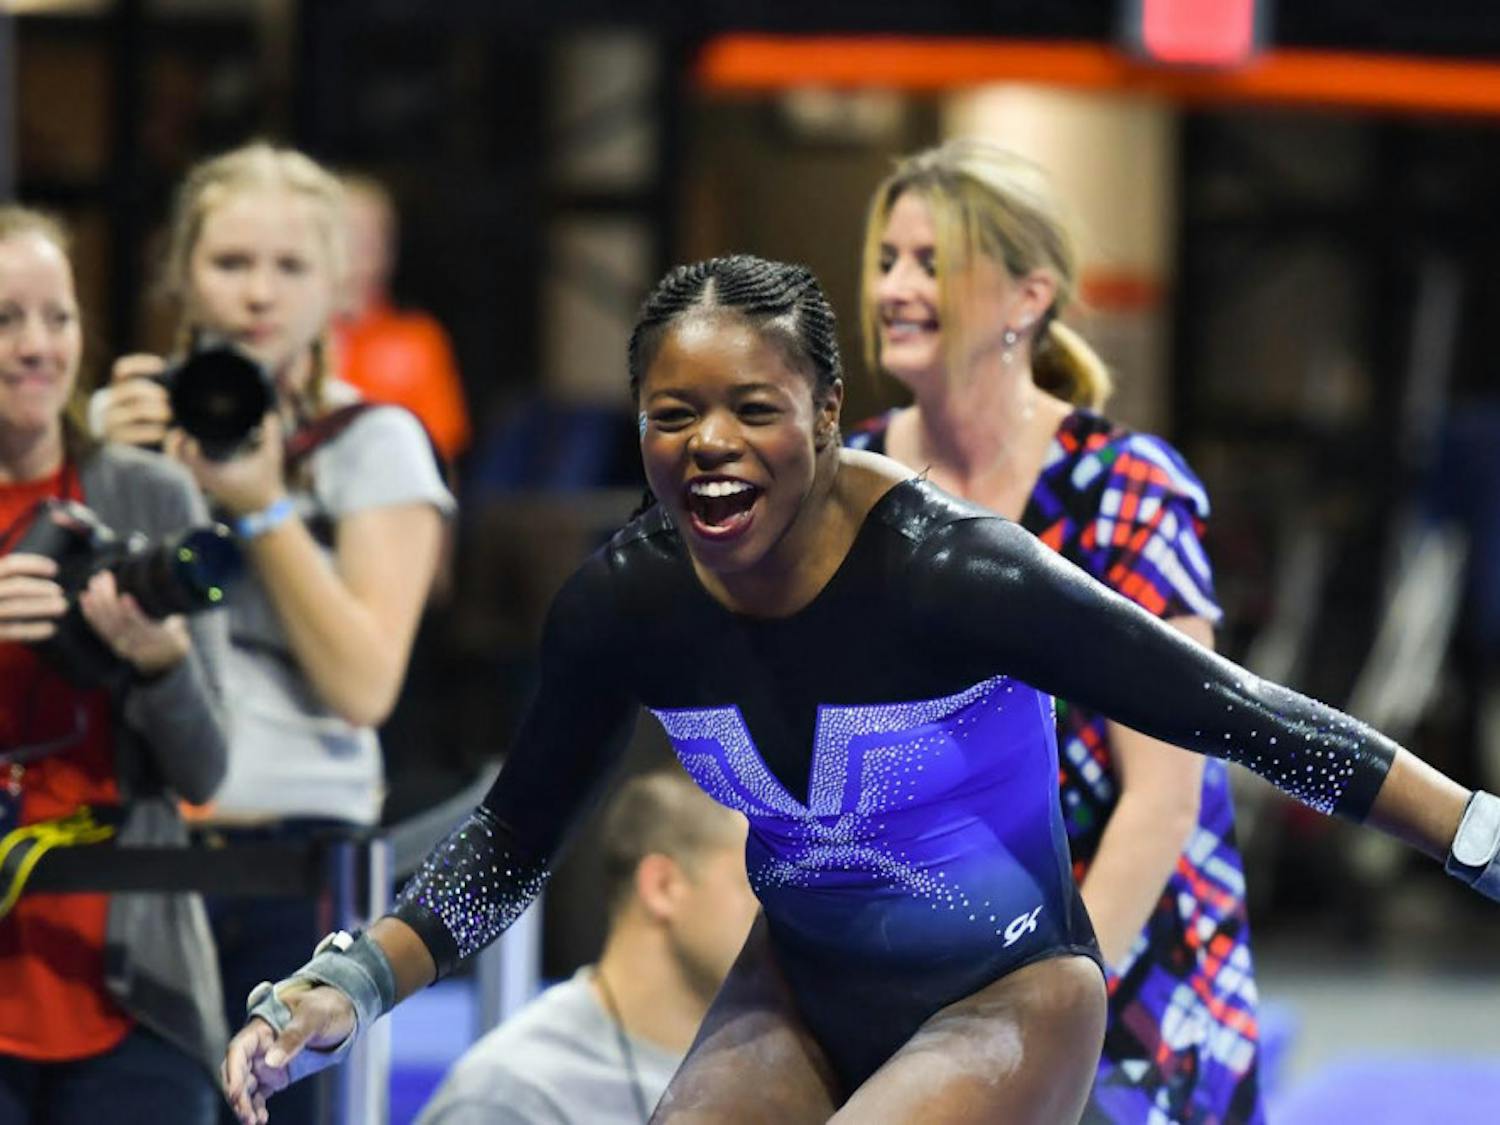 Junior Alicia Boren broke UF’s record for the highest all-around score in a season opener in program history, registering a 39.575 all-around score against West Virginia on Friday. The Gators defeated the Mountaineers 195.900-194.425 to open the season 1-0.